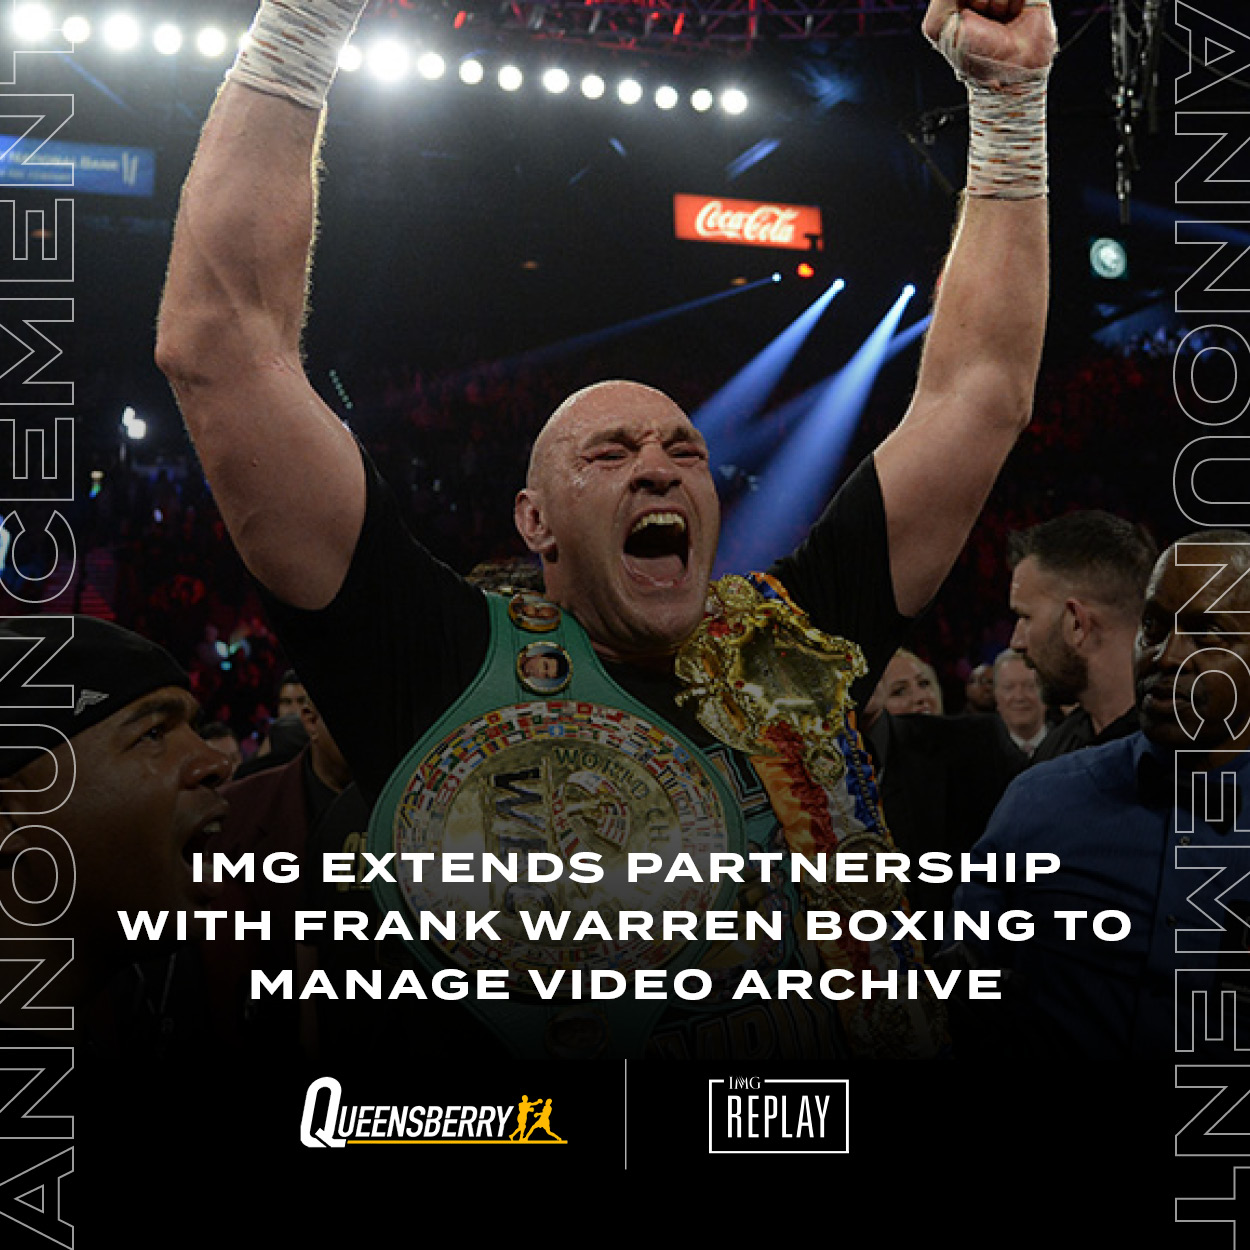 Frank Warren and IMG extend exclusive video archive partnership